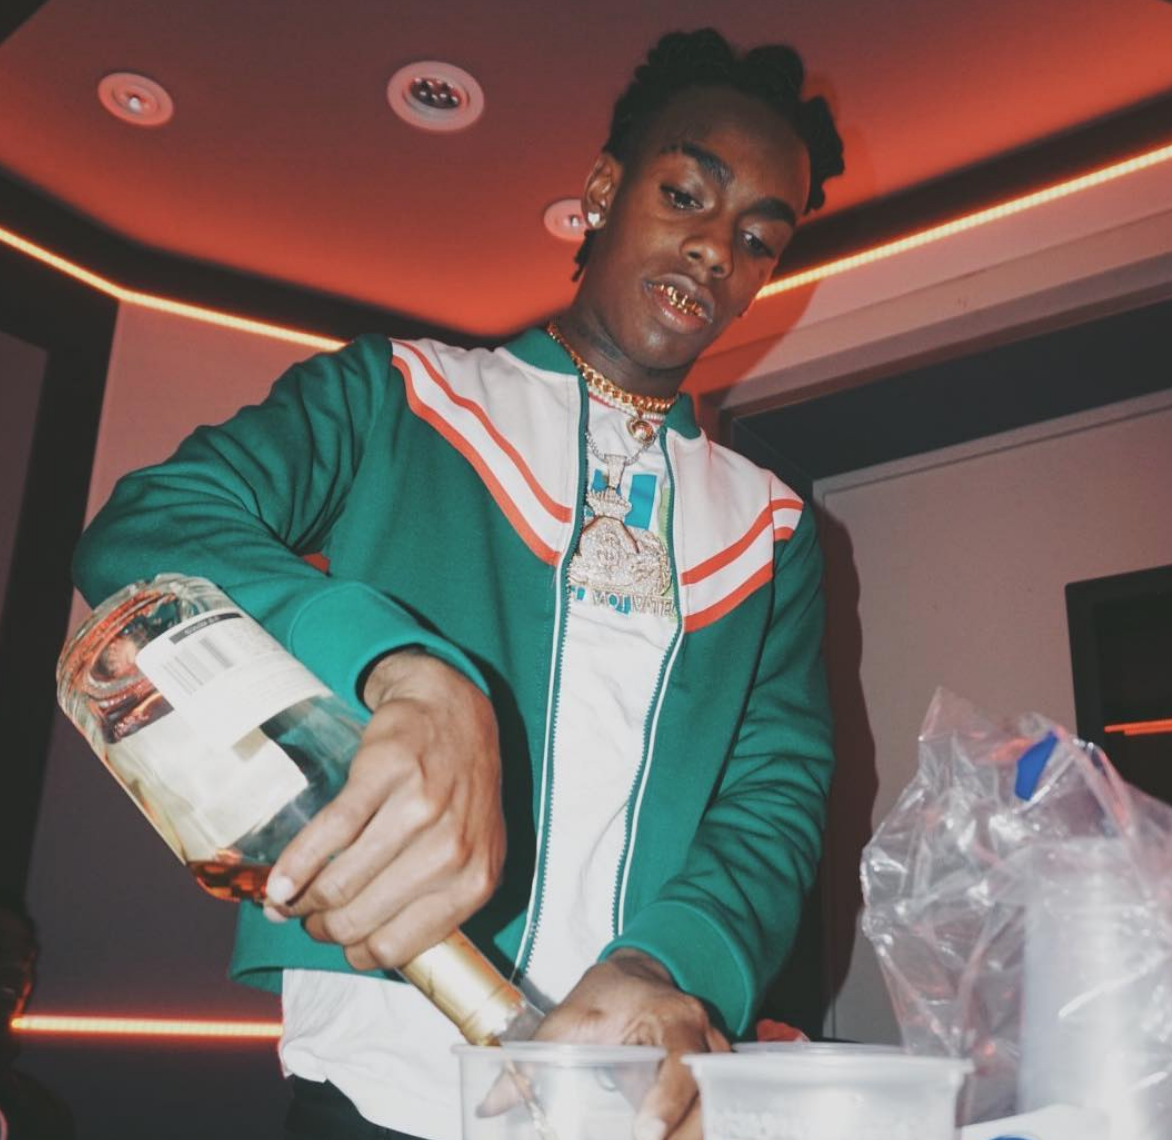 Ynw Melly Kanye West Cole Bennett Just Did Something You Need